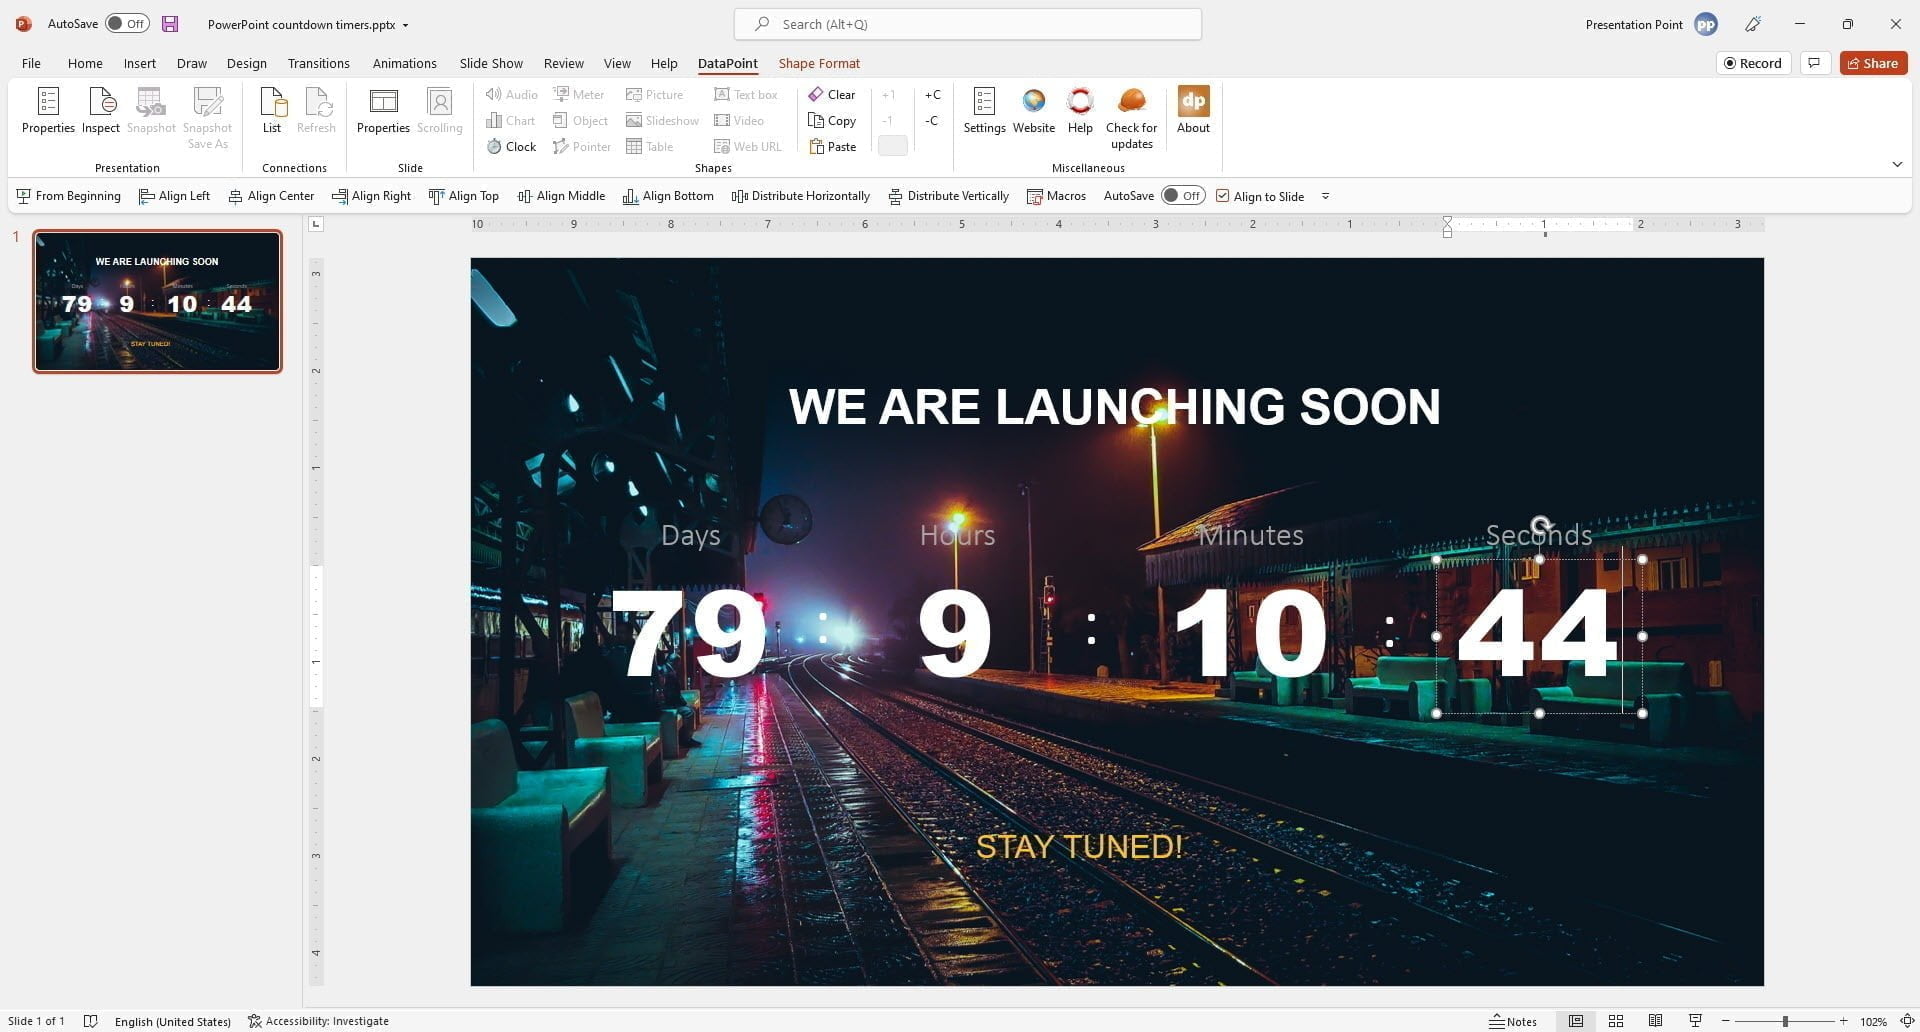 PowerPoint countdown timers slide completed